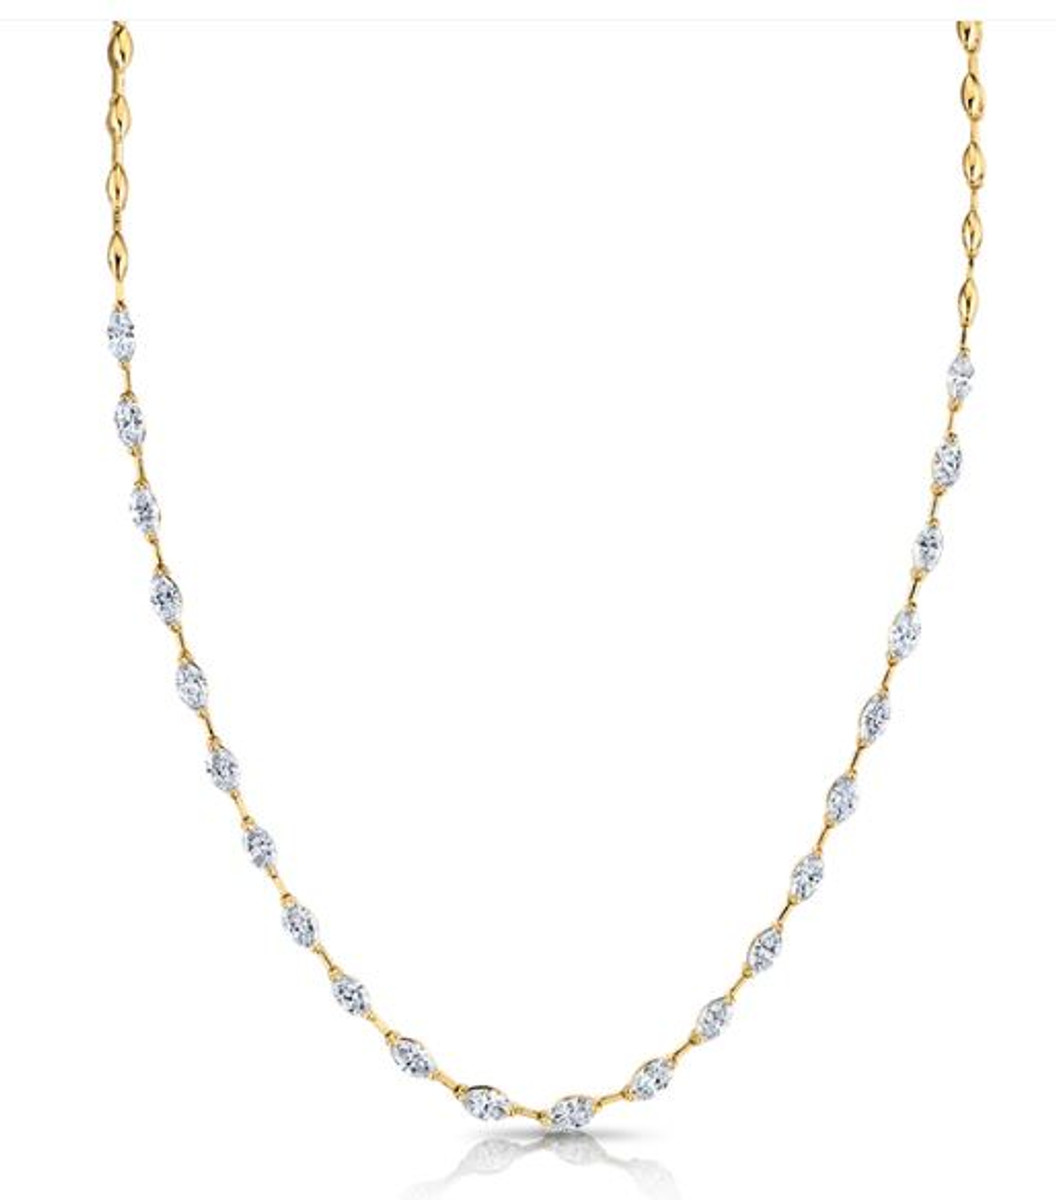 Hyde Park Collection 18K Yellow Gold Marquise Diamond Necklace-58234 Product Image